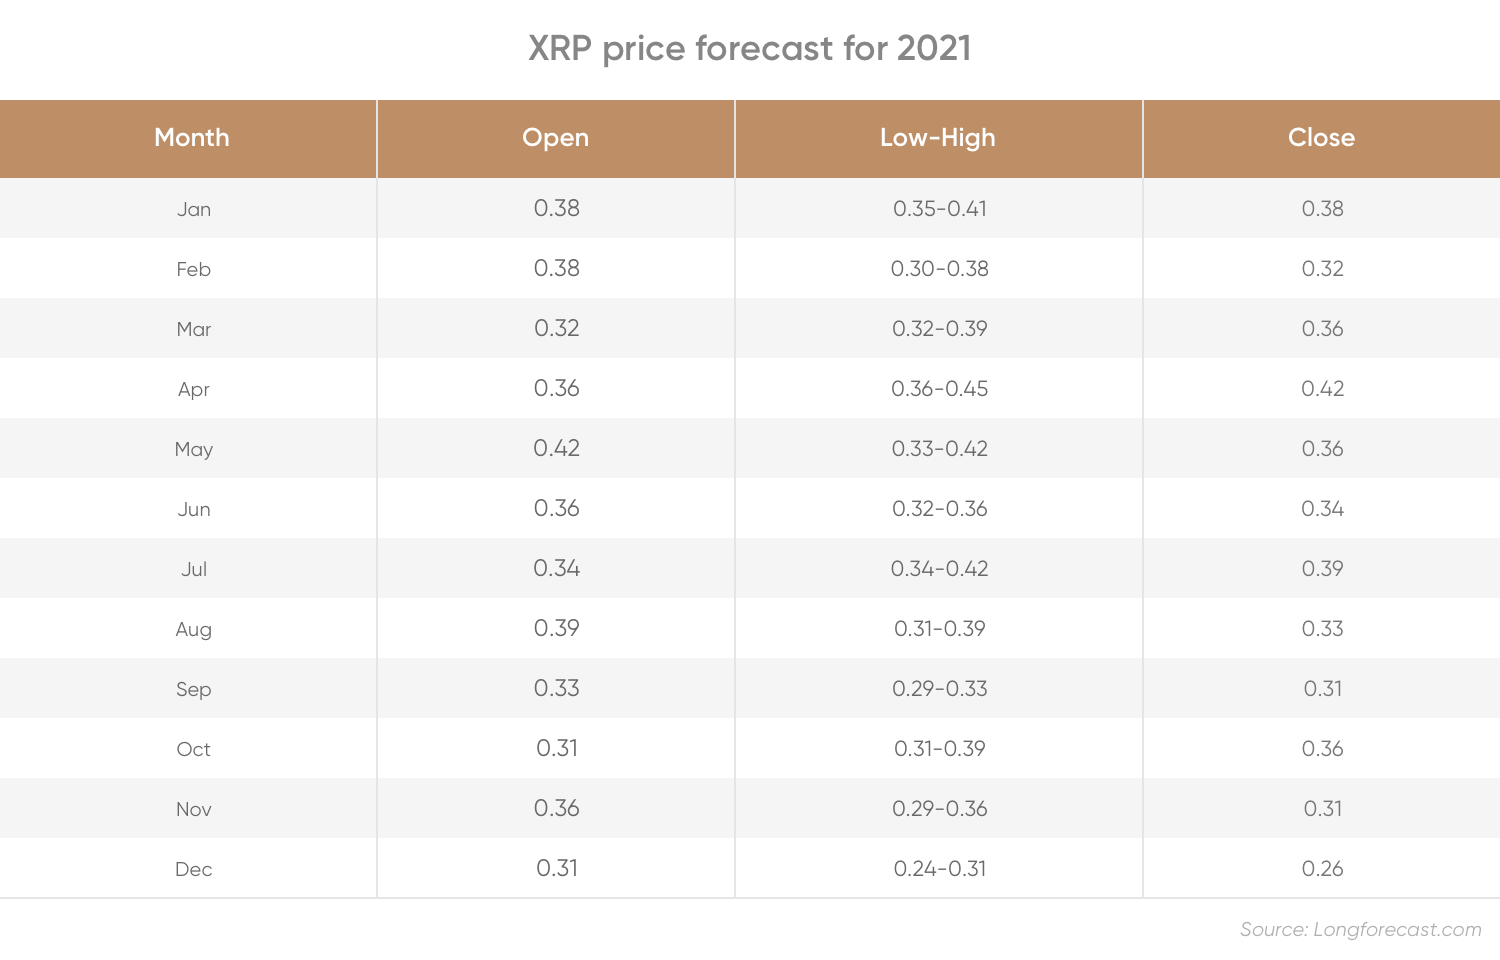 XRP price forecast for 2021